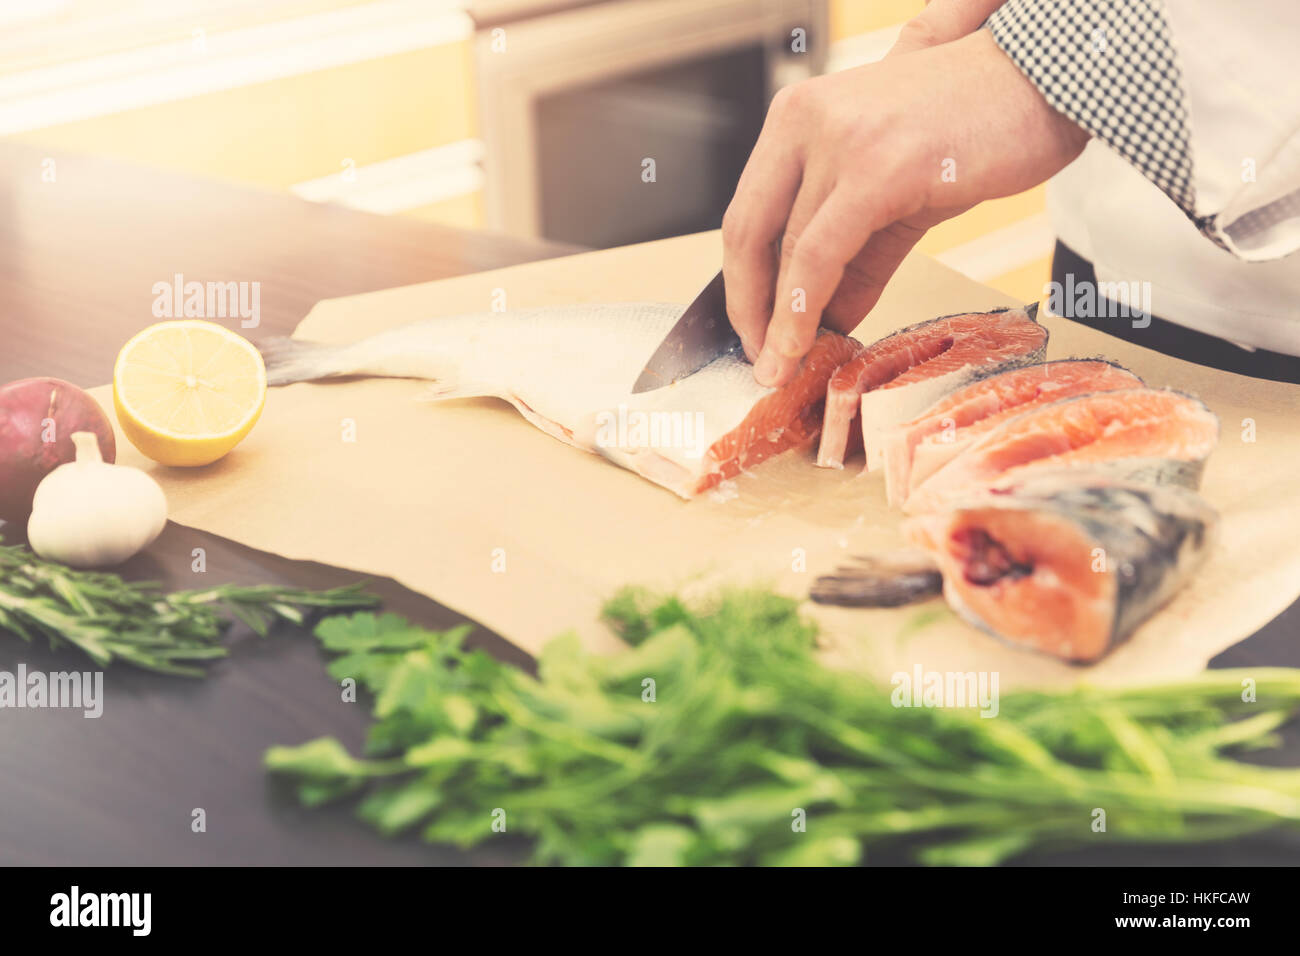 seafood - cook slicing salmon for preparing Stock Photo